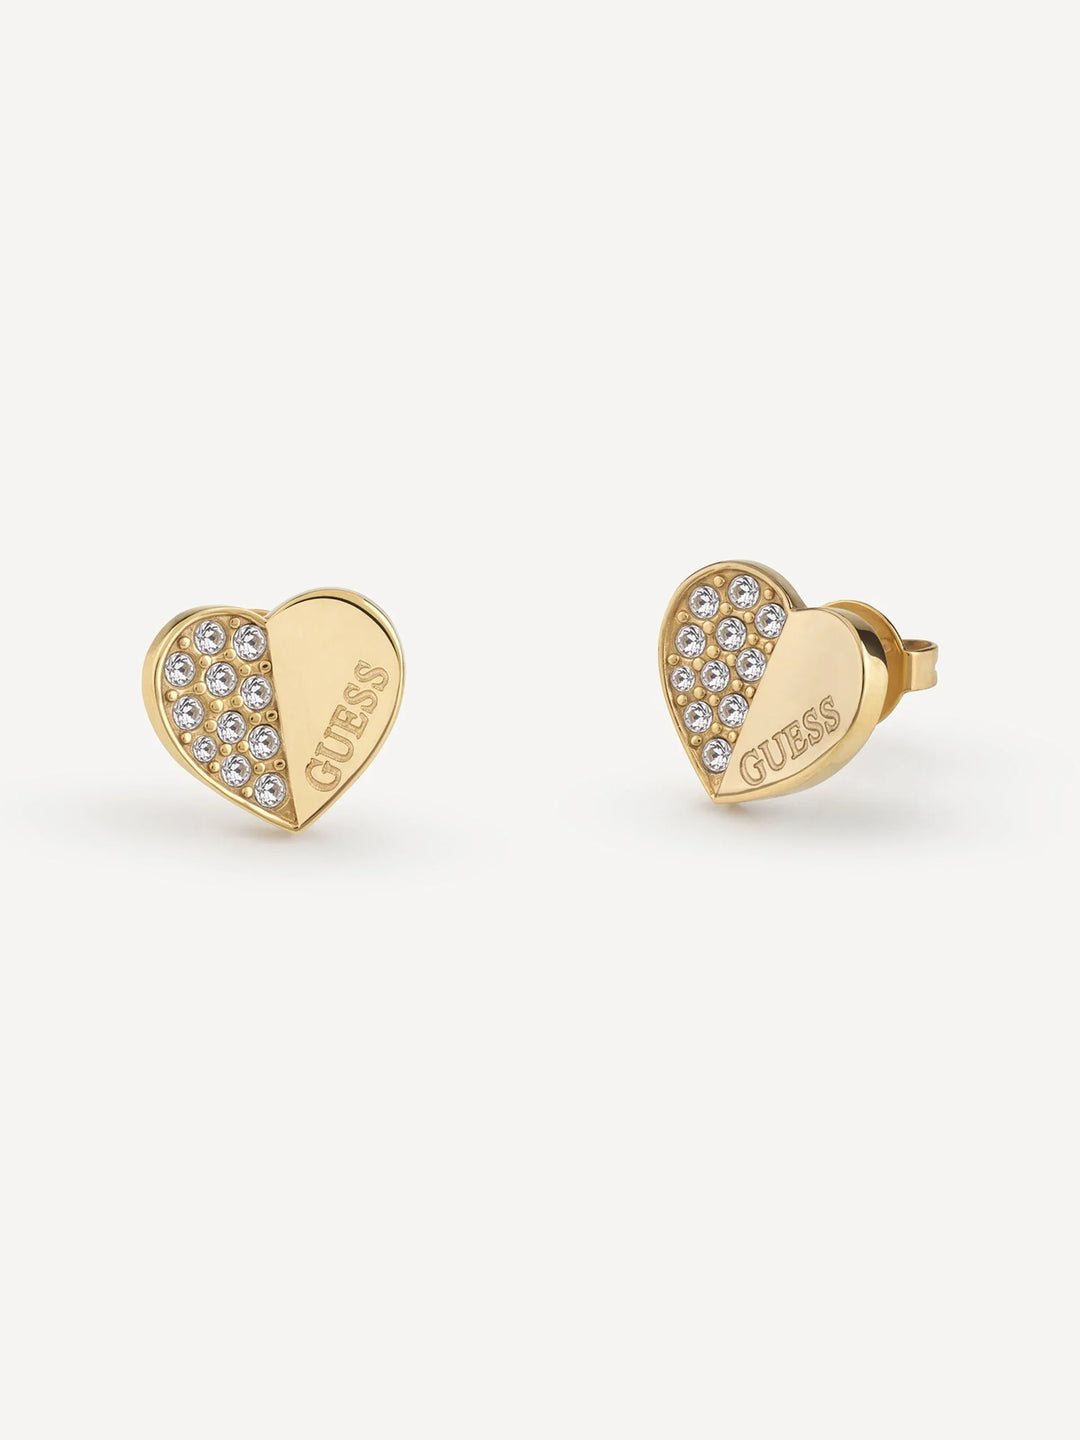 STUD EARRINGS - LOVELY GUESS - Guess